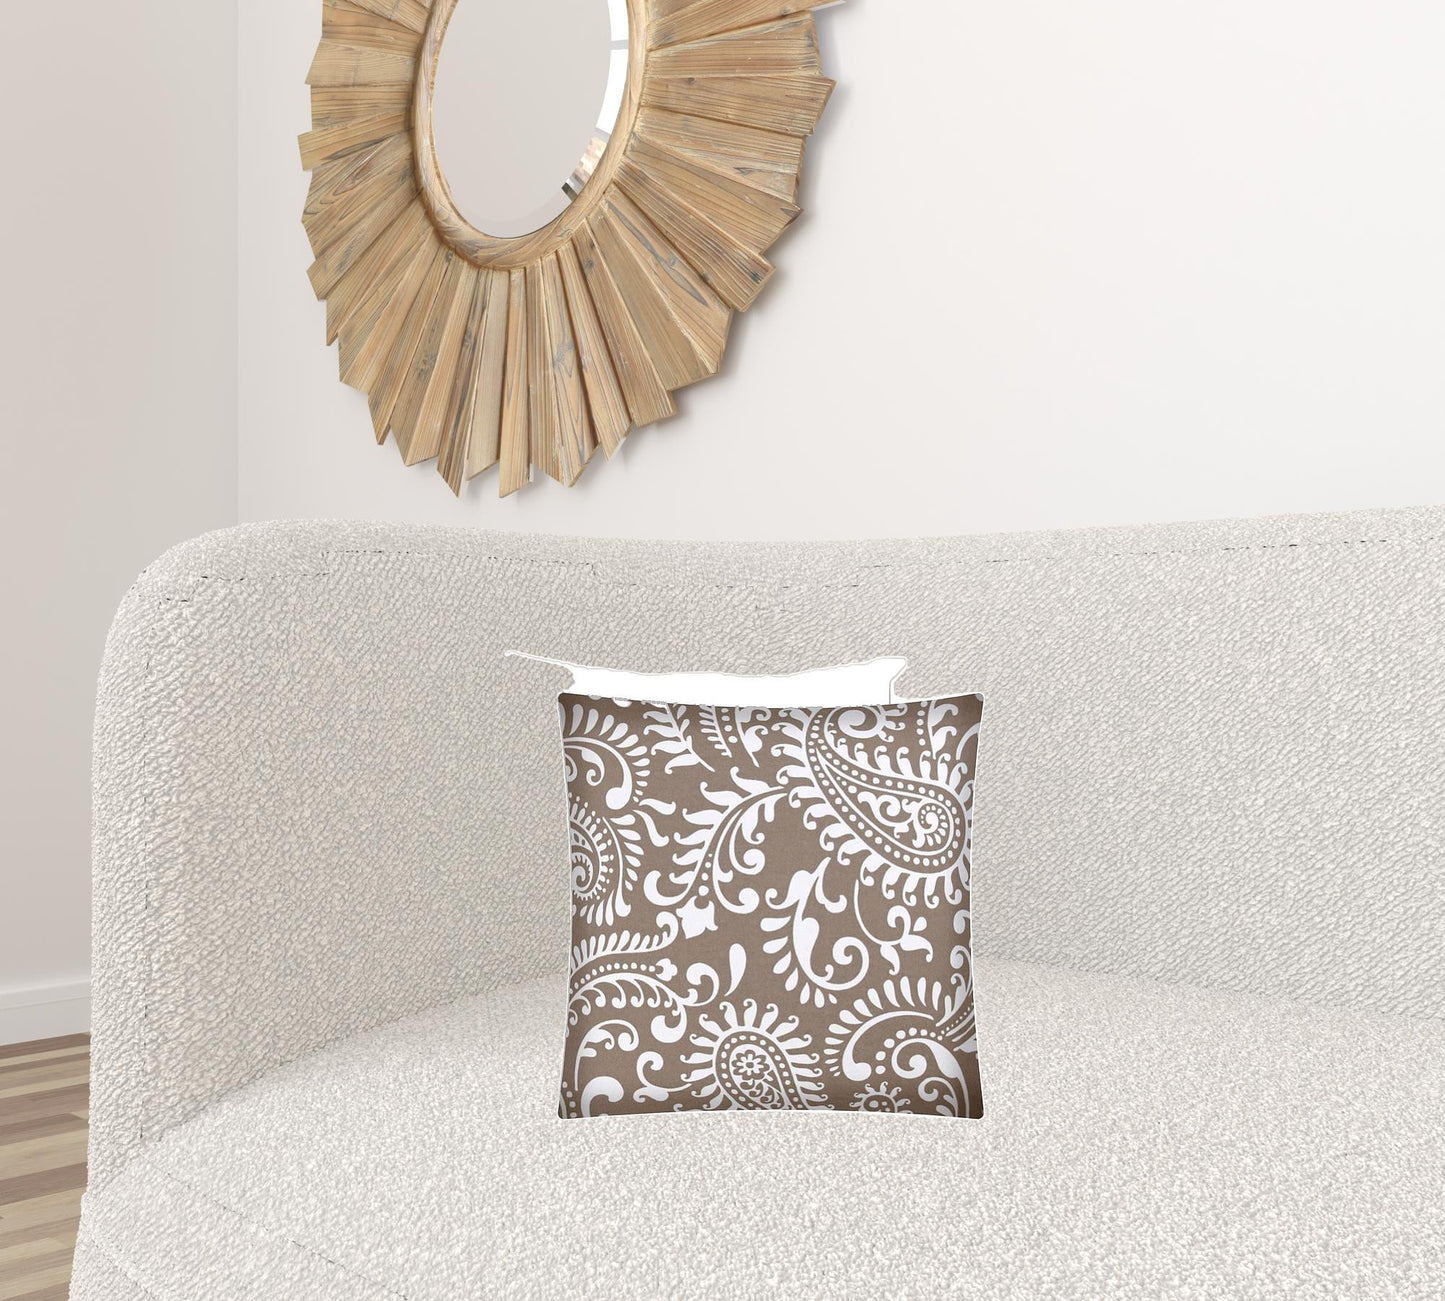 17" X 17" Taupe And White Zippered Paisley Throw Indoor Outdoor Pillow